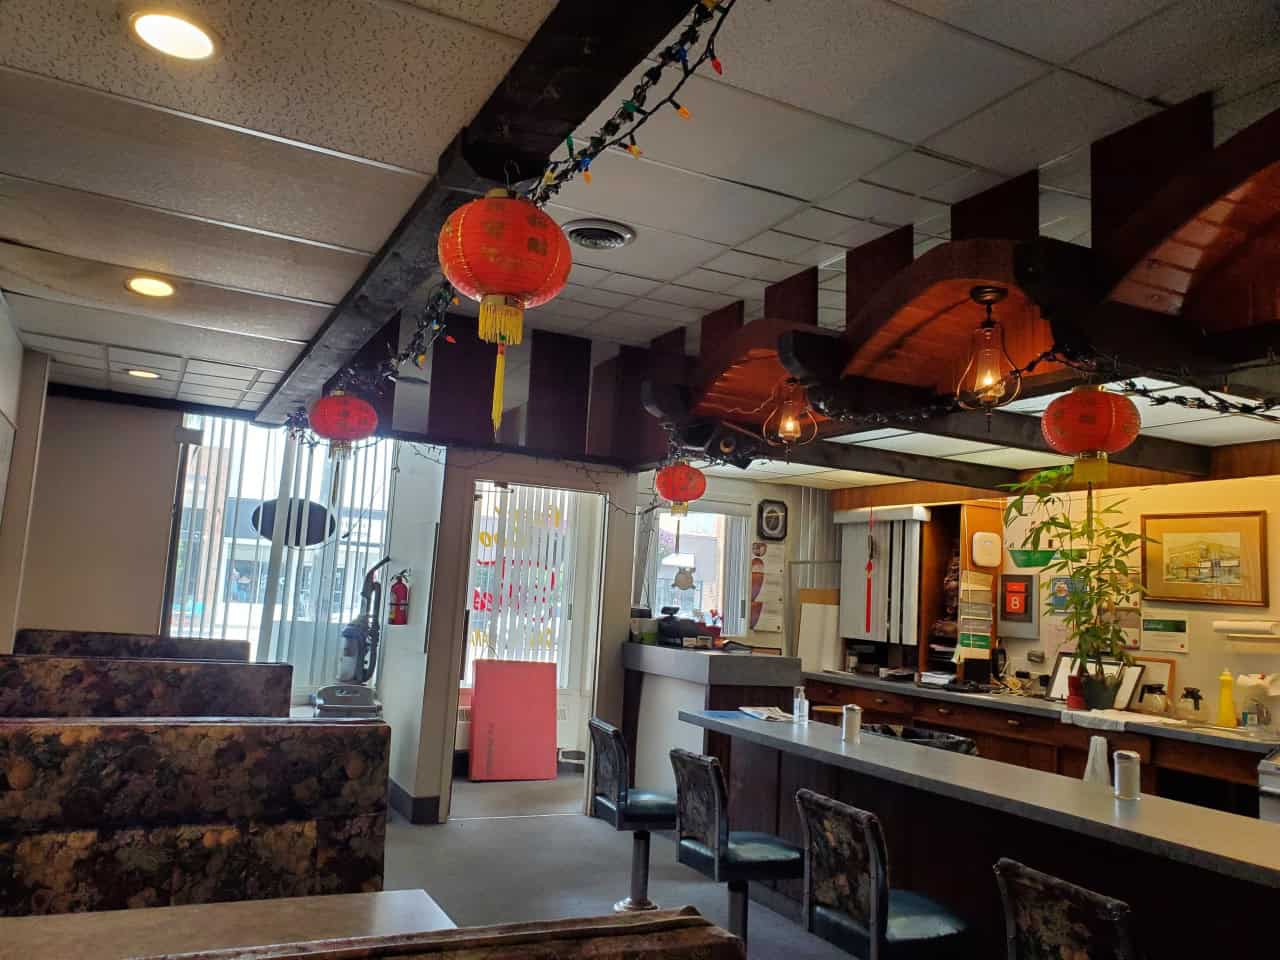 Uptown Cafe Fun Decor  - This Moose Jaw restaurant serves both Canadian menu options and some great Chinese food choices as well